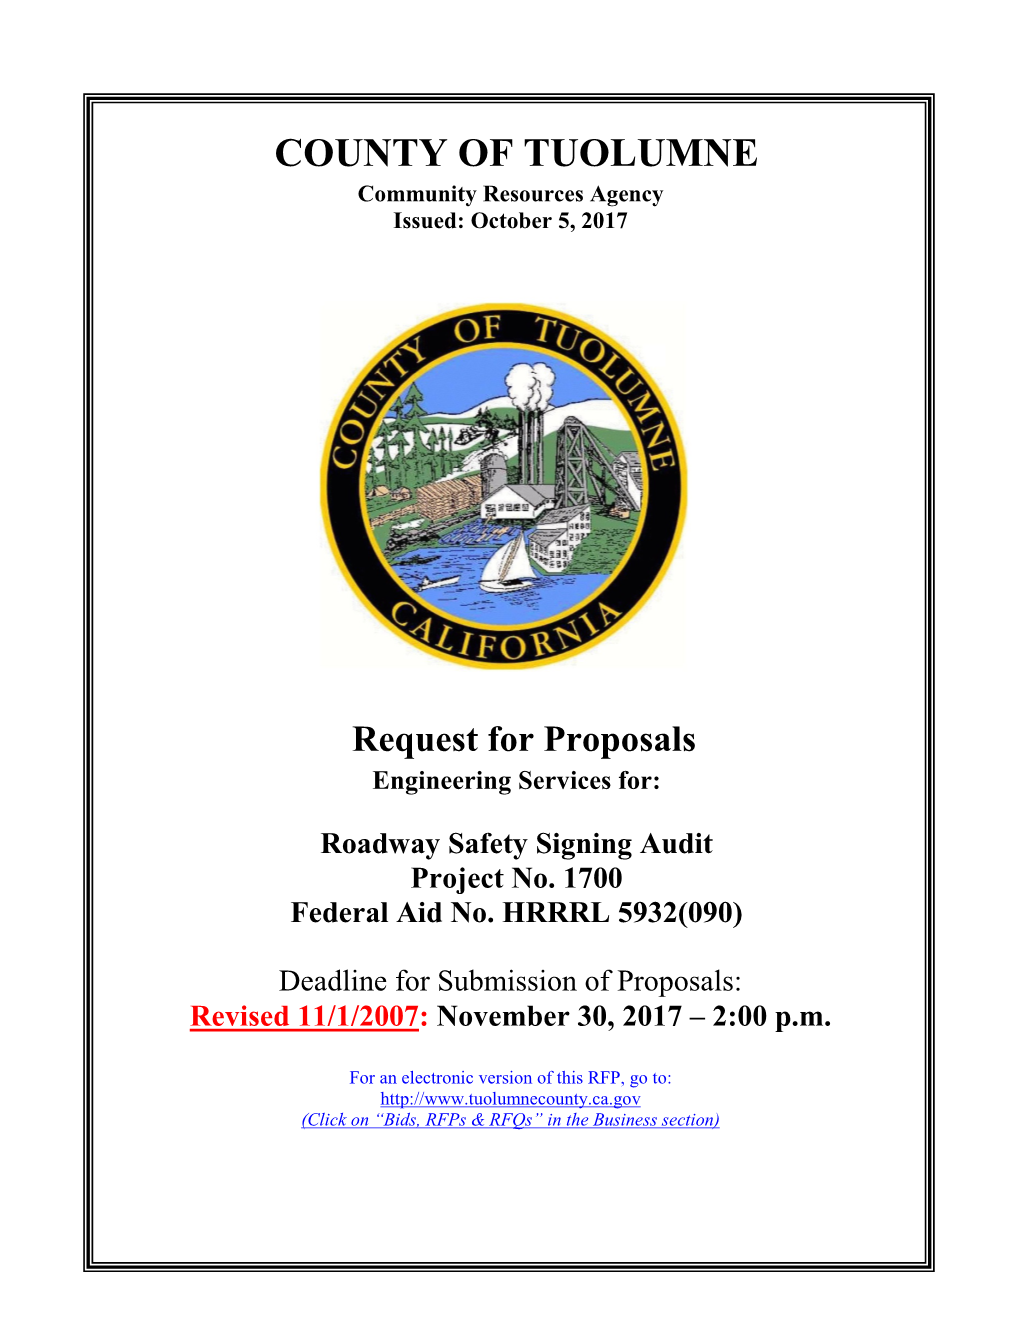 Tuolumne County Standard Agreement for Professional Services (DRAFT)